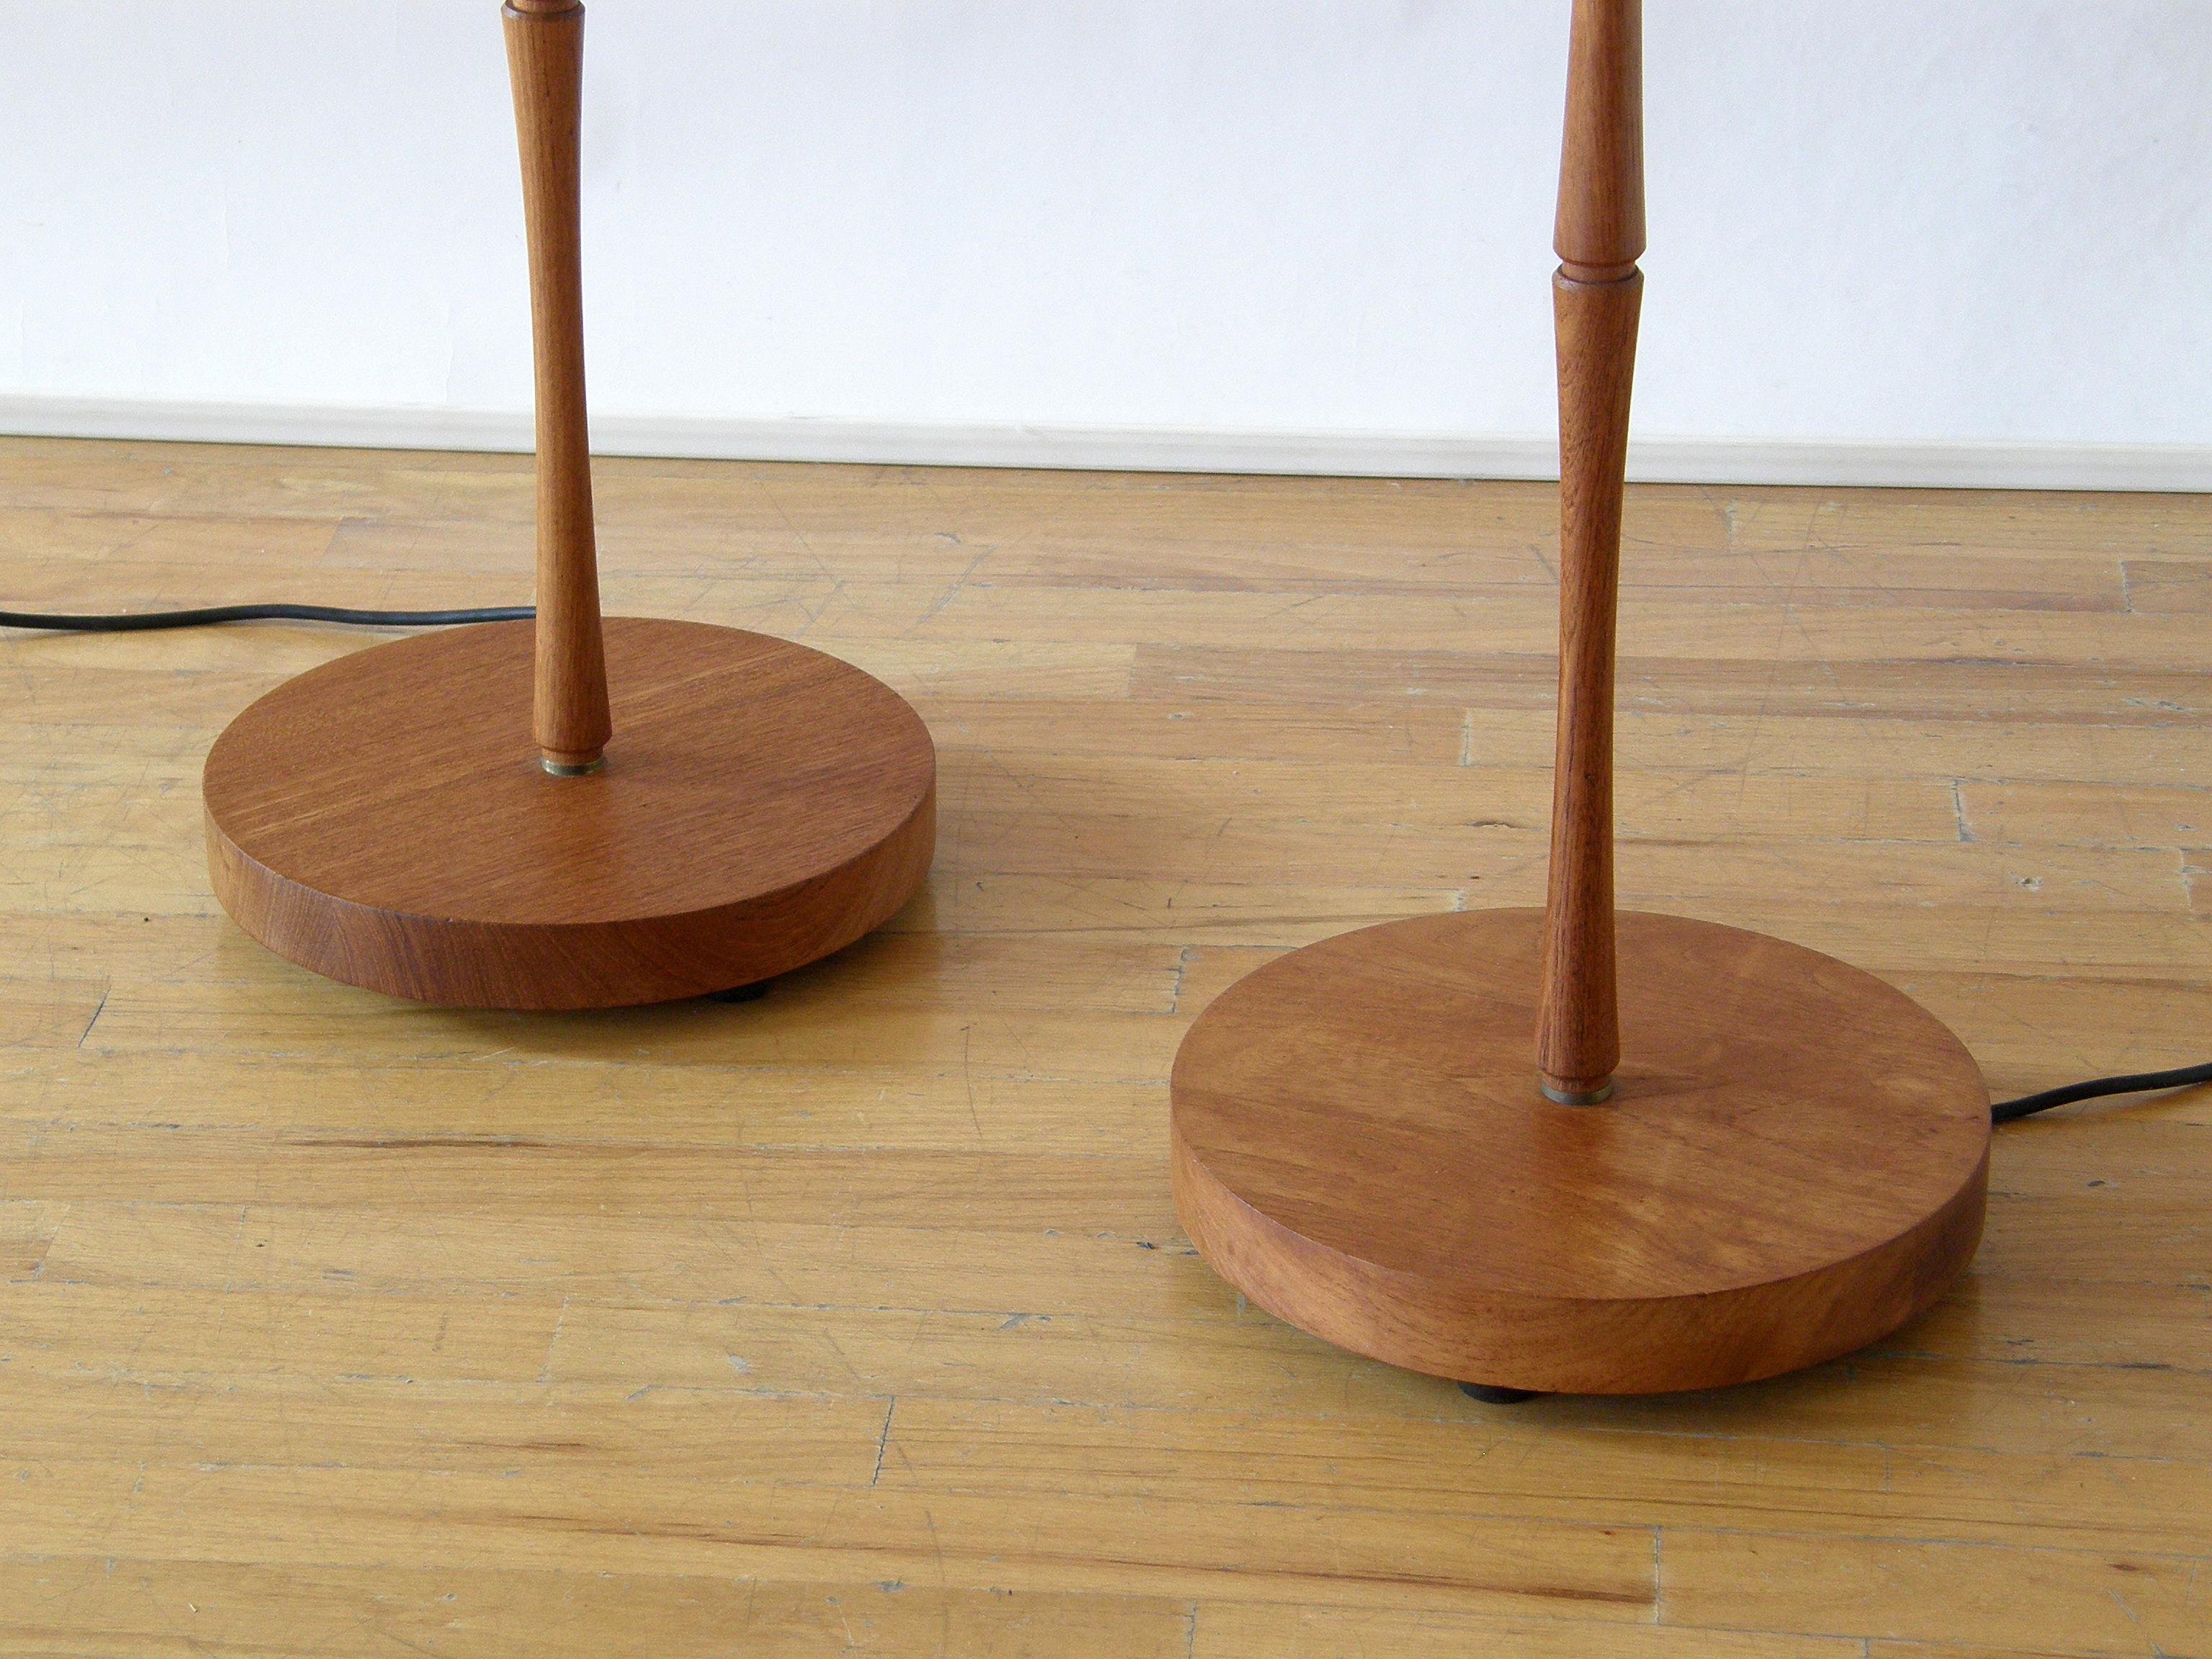 Turned Pair of Teak Floor Lamps with Stylized Modernist Faux Bamboo Design